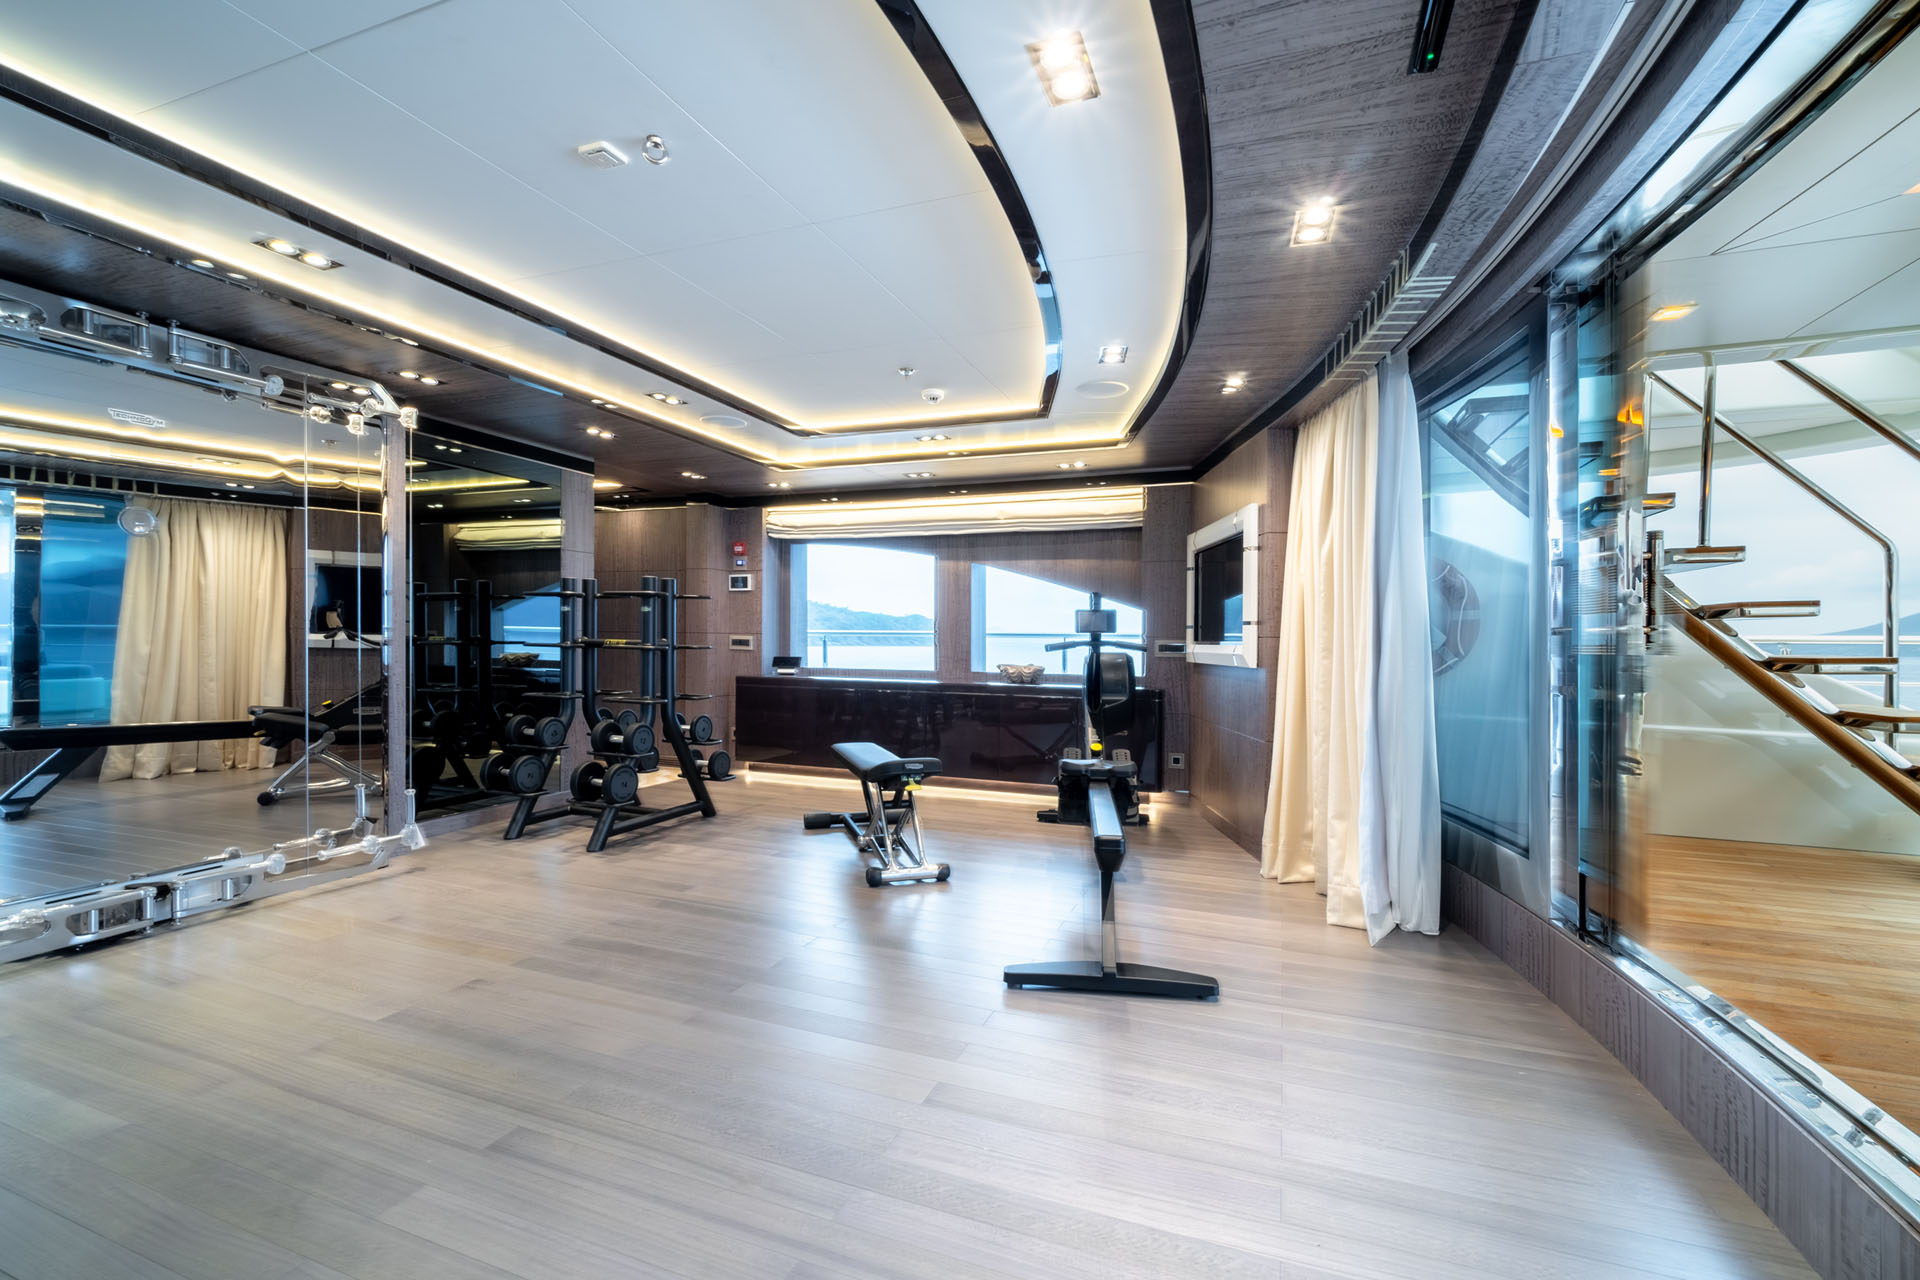 Gym With Fantastic Views On Mega Yacht